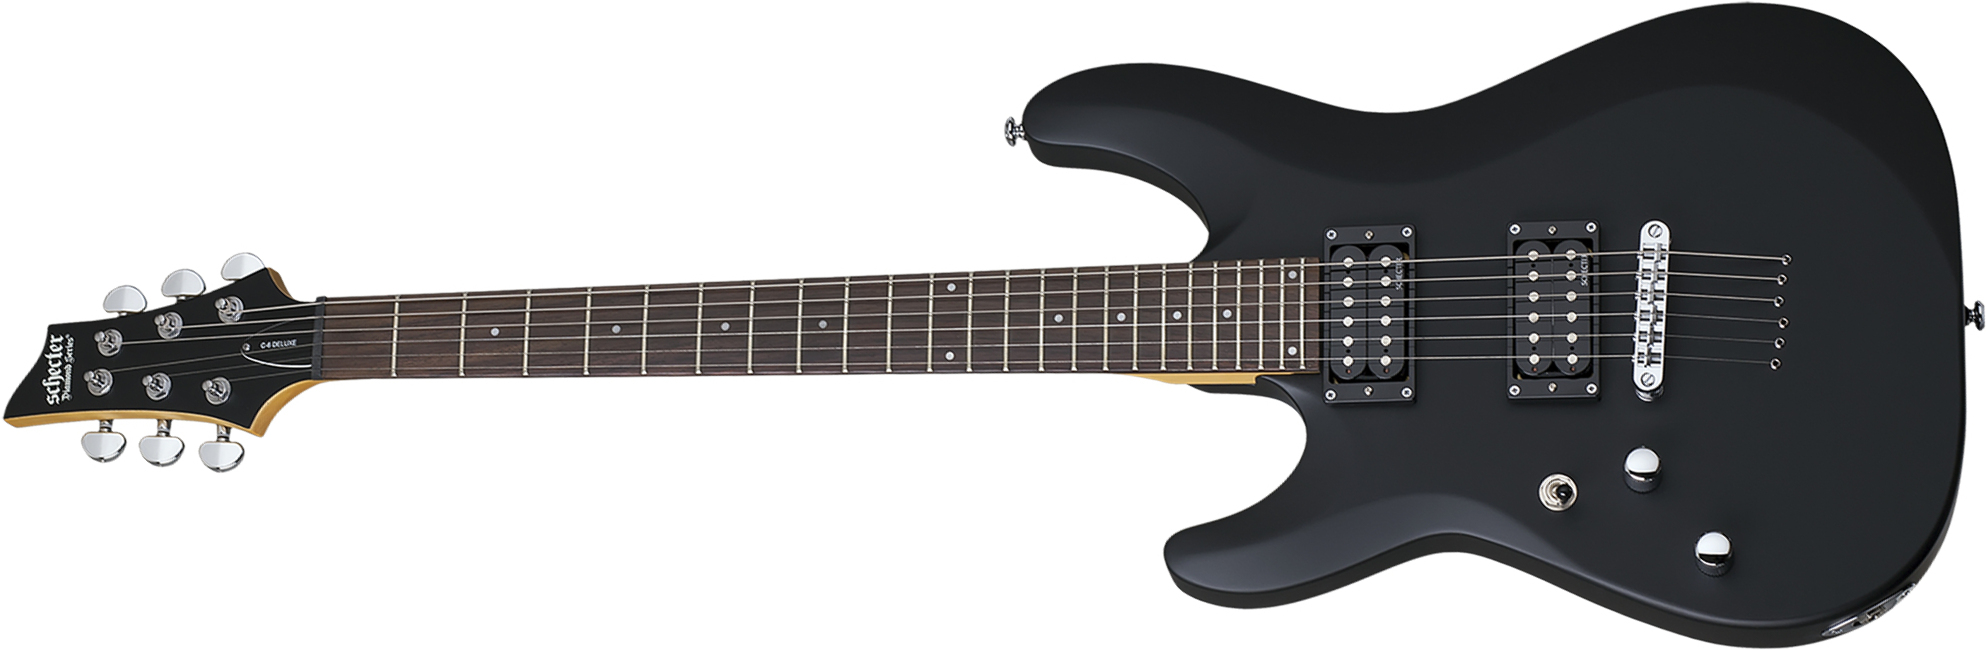 Schecter C-6 Deluxe Lh Gaucher 2h Ht Rw - Satin Black - Left-handed electric guitar - Main picture